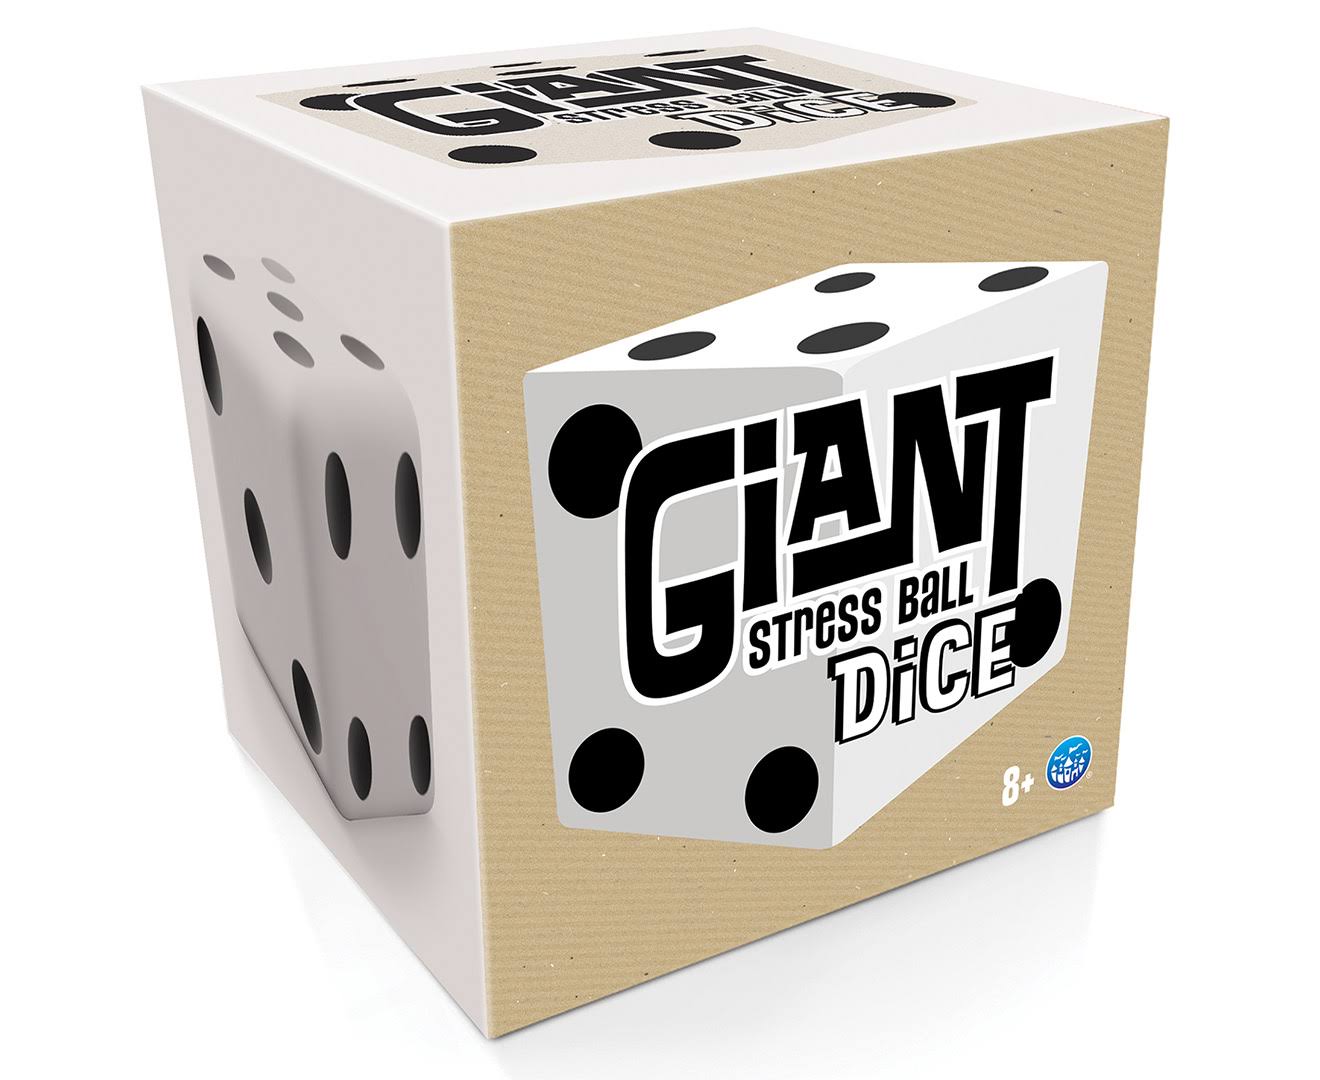 Giant Stress Ball Dice Toy